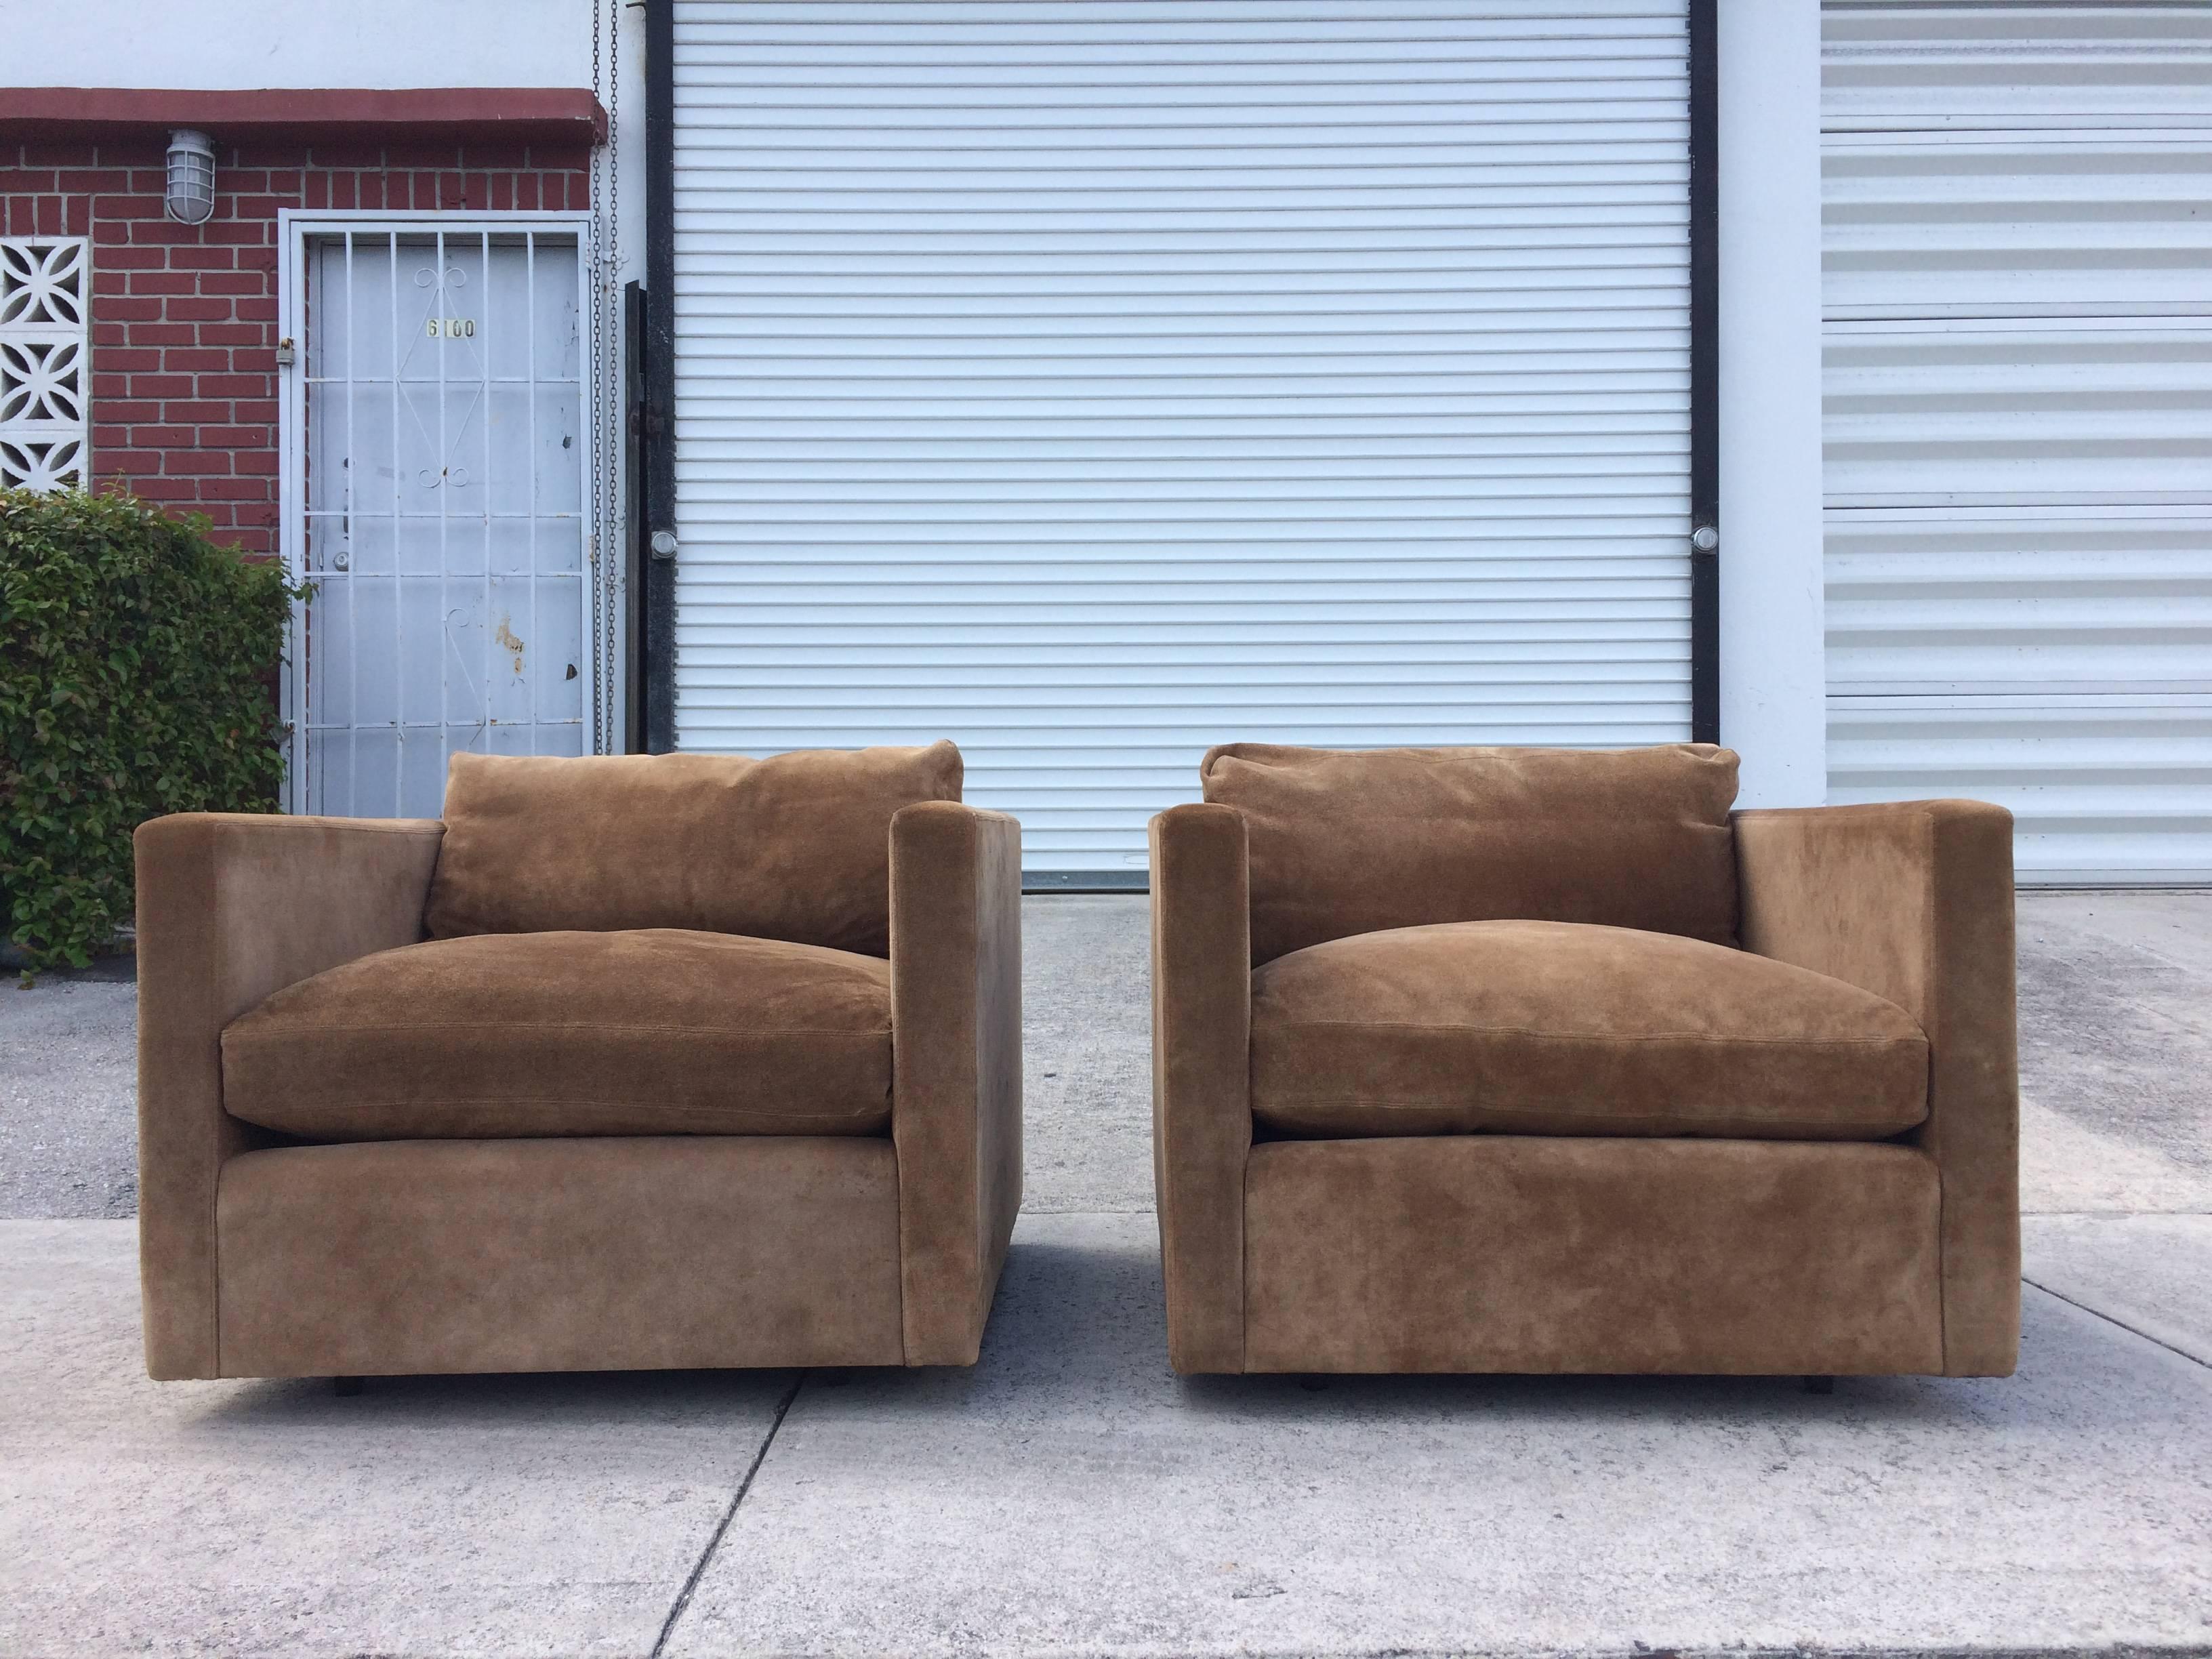 Brown suede leather lounge chairs by Charles Pfister for Knoll. The cushions are feathers and foam filled. Very comfortable. The chairs are signed.
We have a matching sofa.